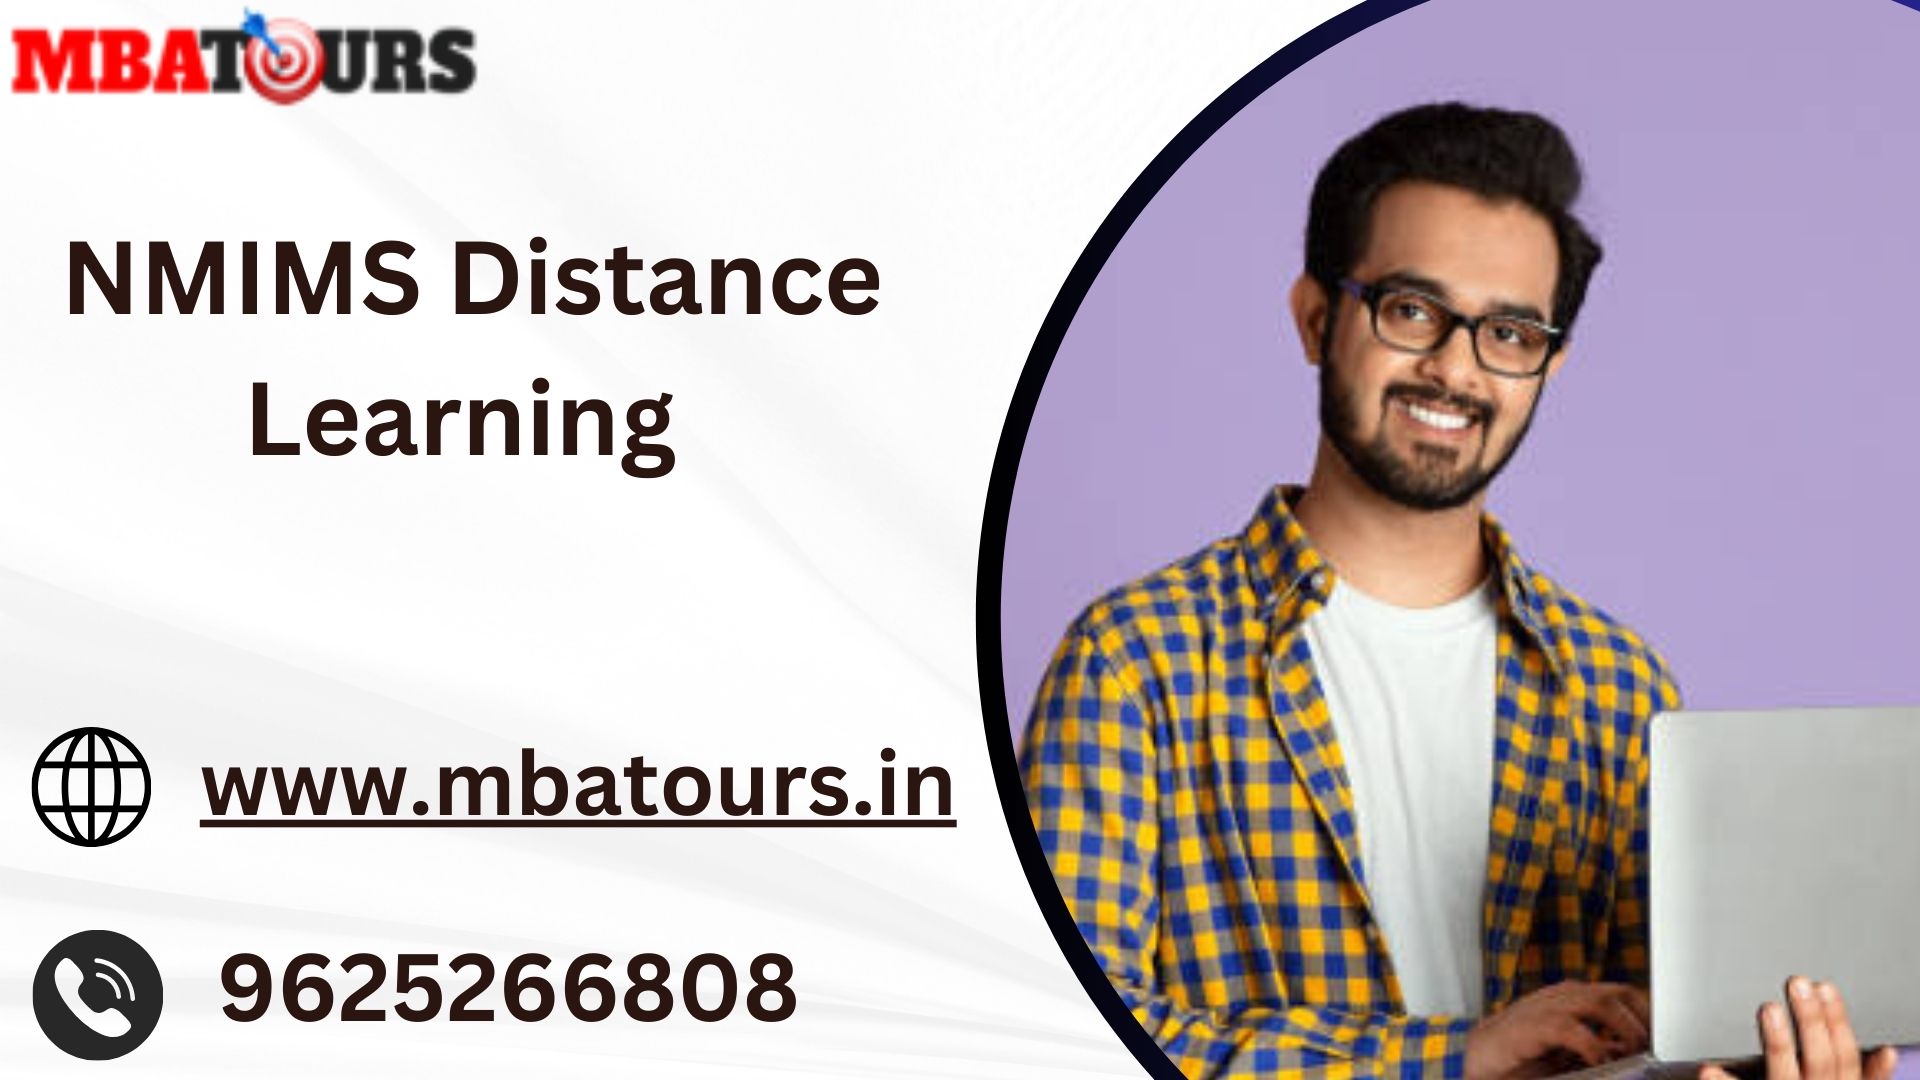 NMIMS Distance Learning